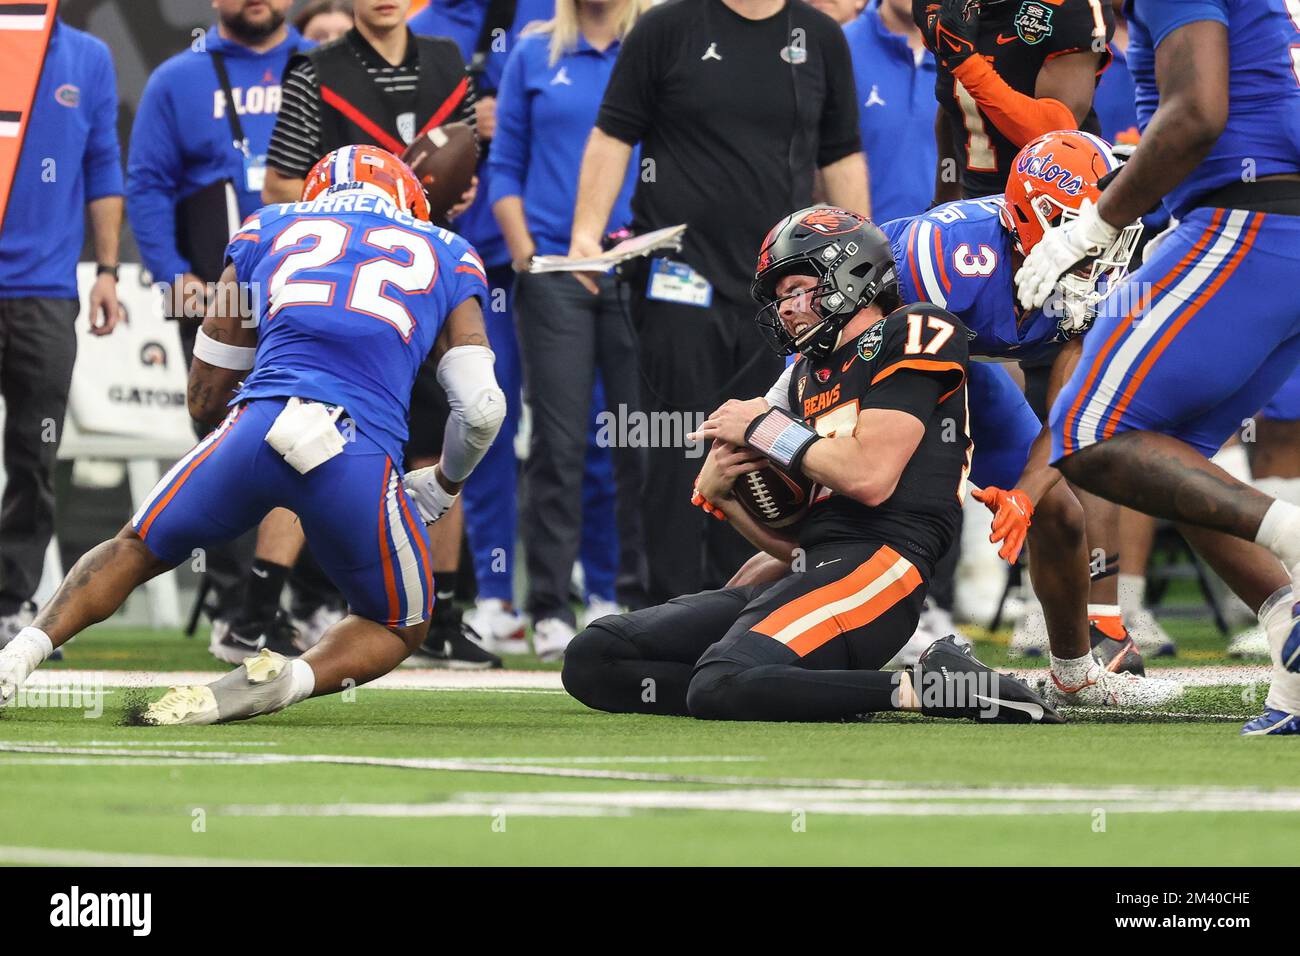 Las Vegas, NV, USA. 17th Dec, 2022. Oregon State Beavers quarterback Ben Gulbranson (17) slides after running with the football during the second half of the SRS Distribution Las Vegas Bowl featuring the Florida Gators and the Oregon State Beavers at Allegiant Stadium in Las Vegas, NV. Christopher Trim/CSM/Alamy Live News Stock Photo